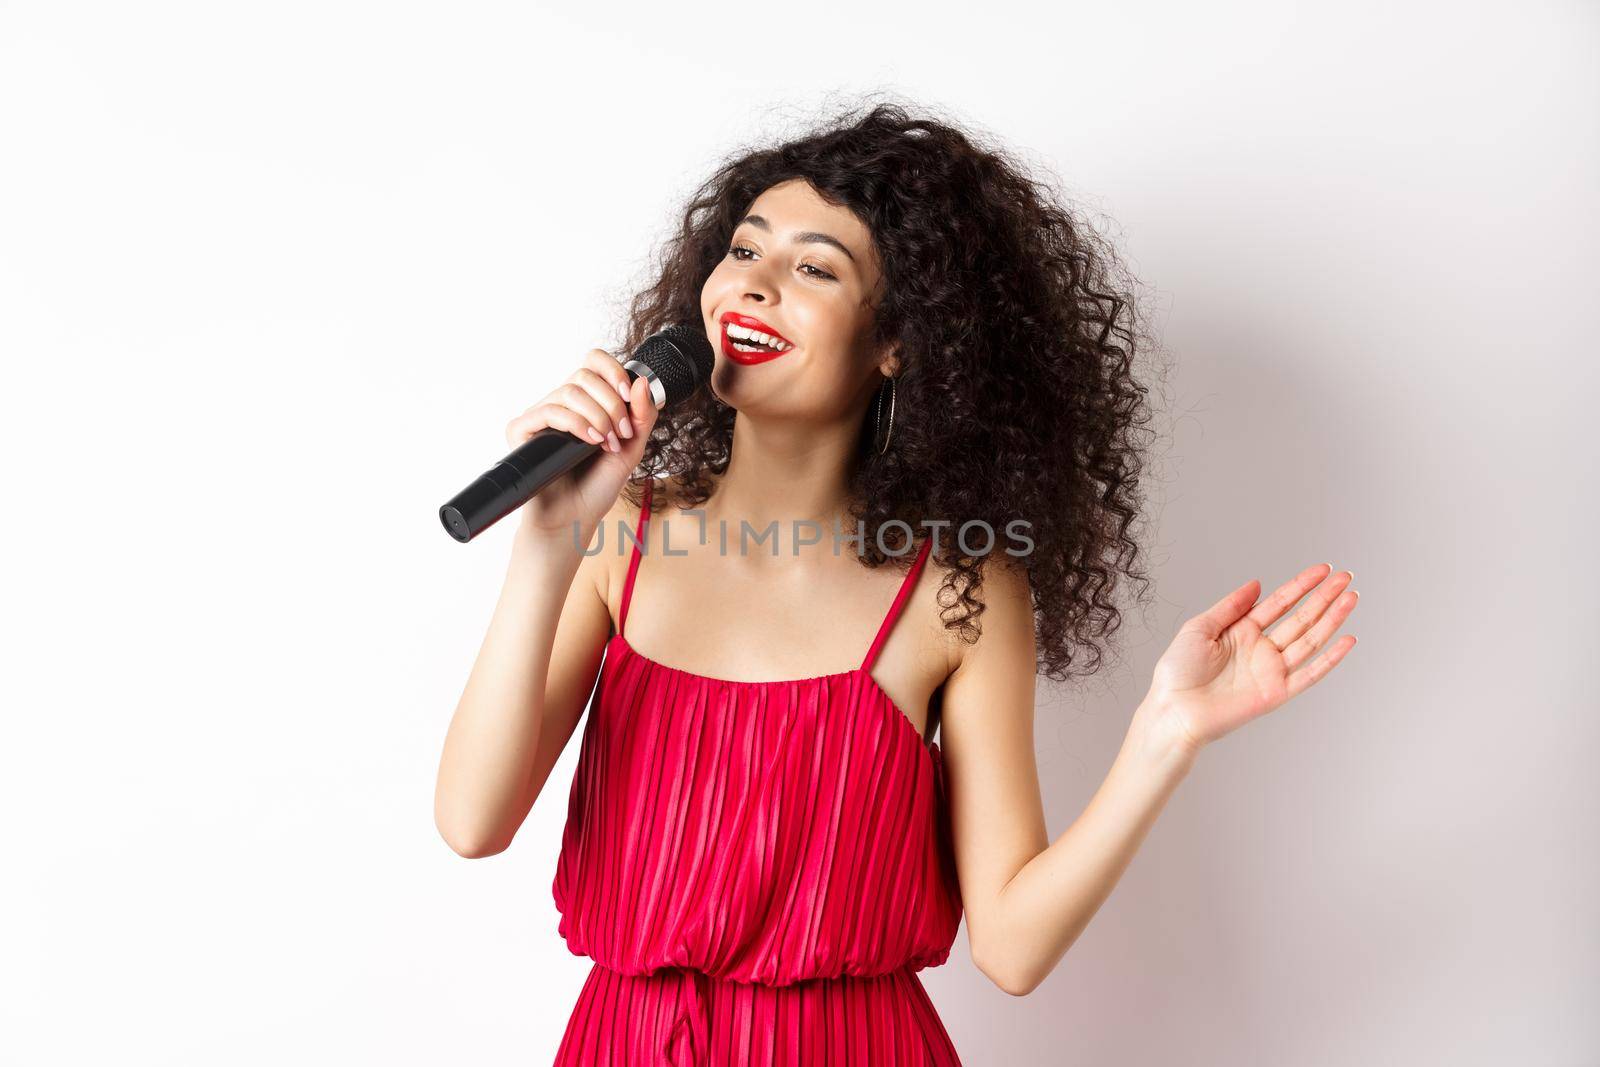 Elegant curly-haired woman in red dress singing in microphone, looking aside and smiling happy, standing on white background.